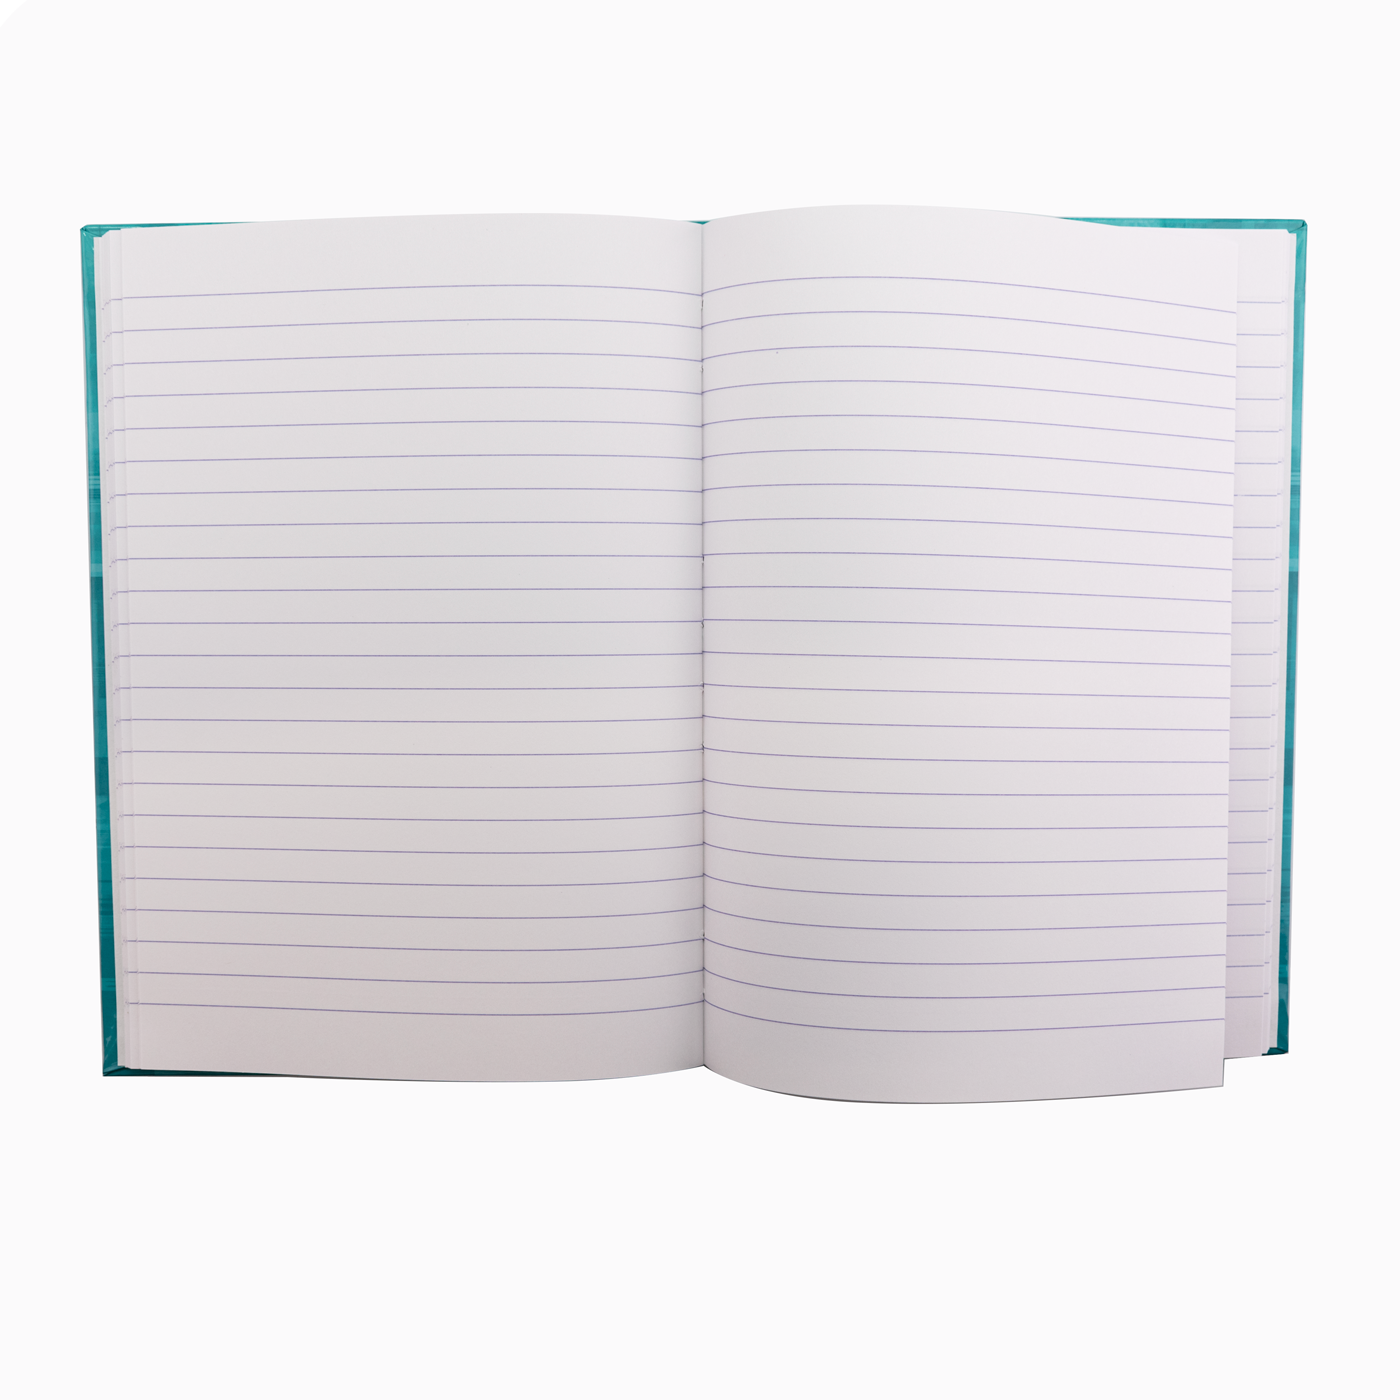 Clairefontaine Classics A5 Hardcover Notebook- Turquoise